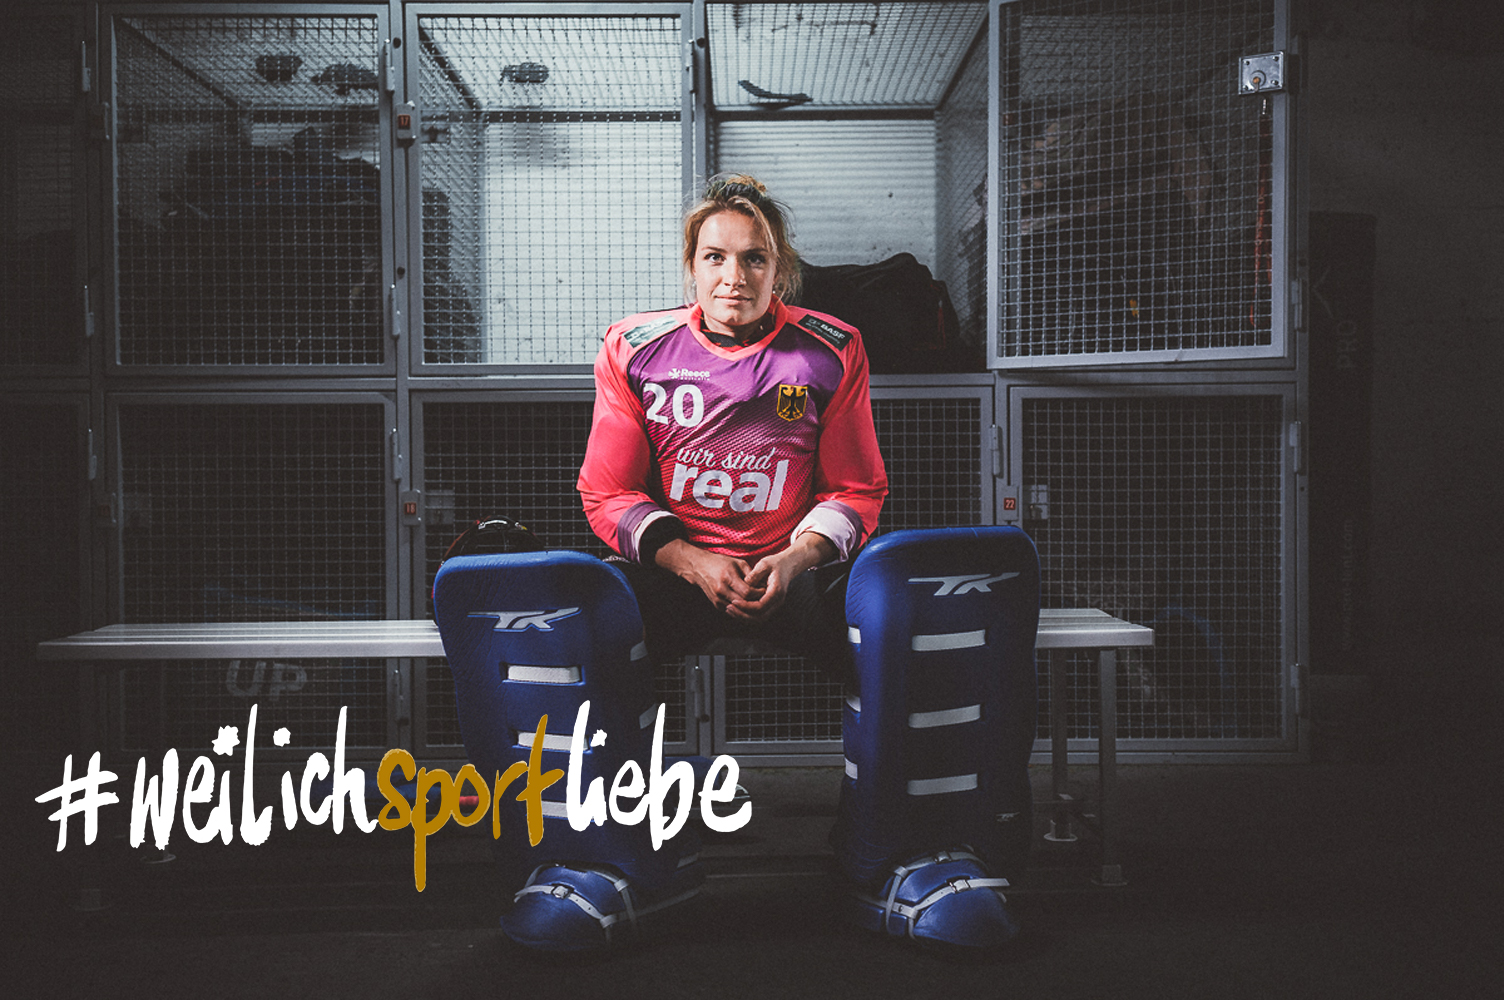 National hockey goalkeeper Julia Sonntag sits in full gear on a bench in the locker room